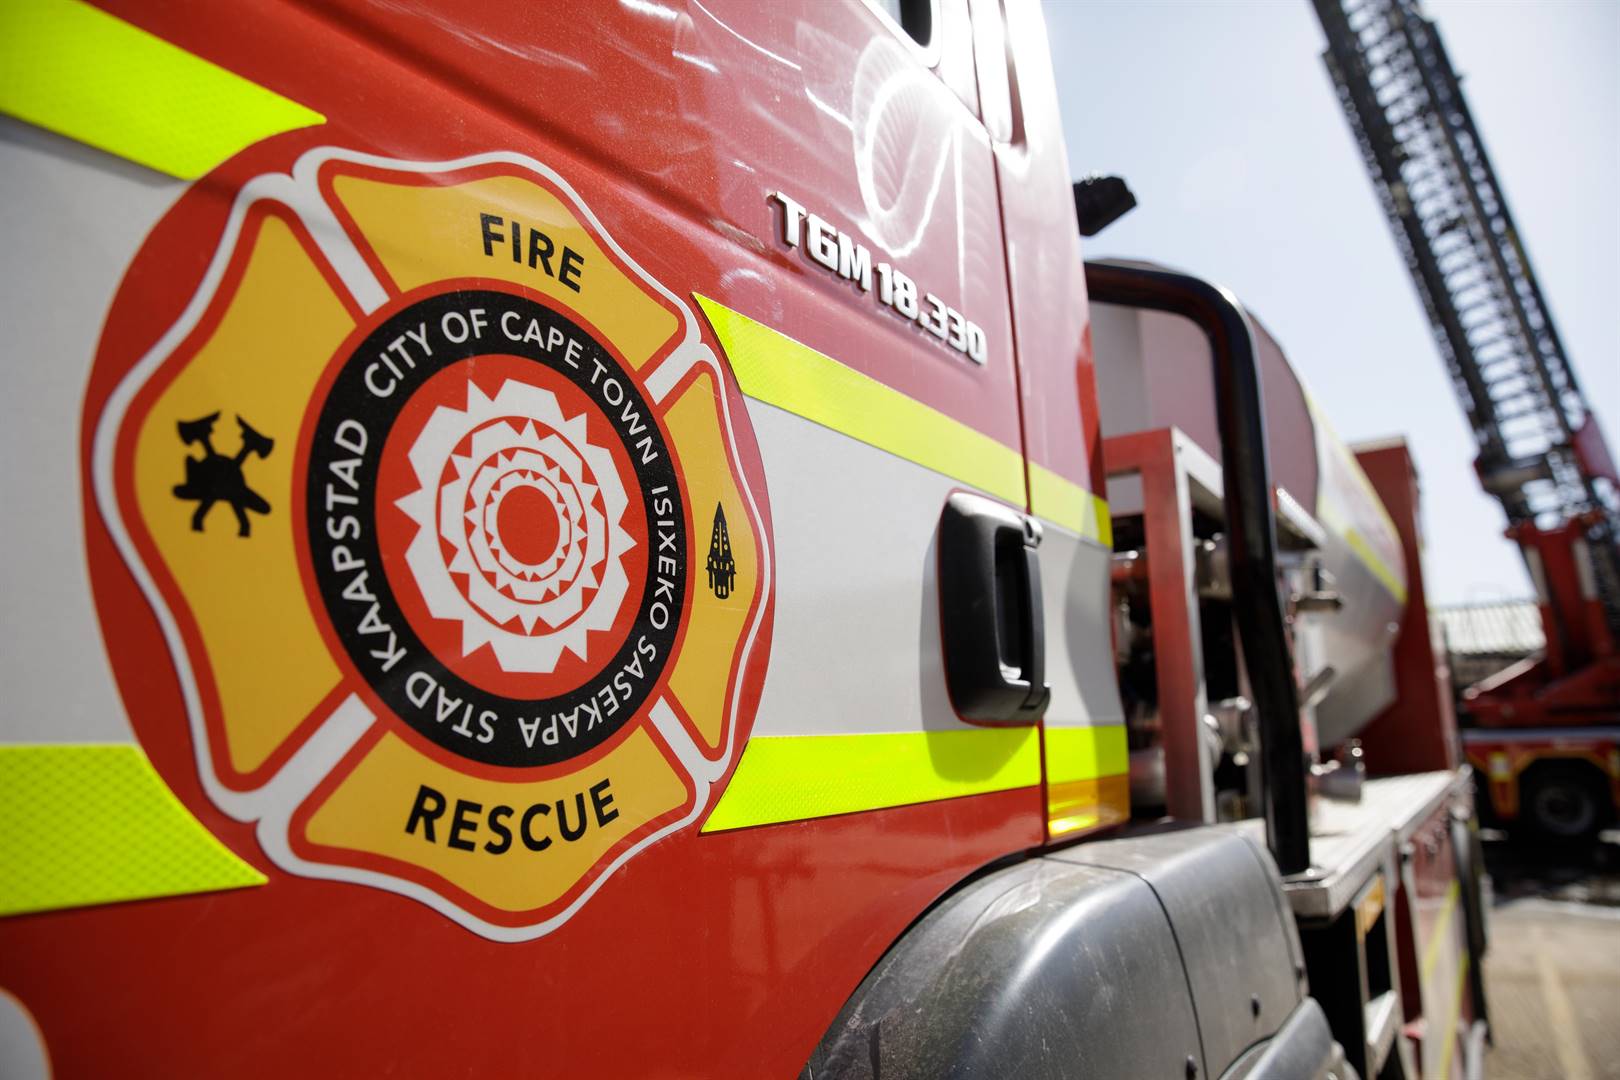 City of Cape Town's Fire and Rescue Service. 